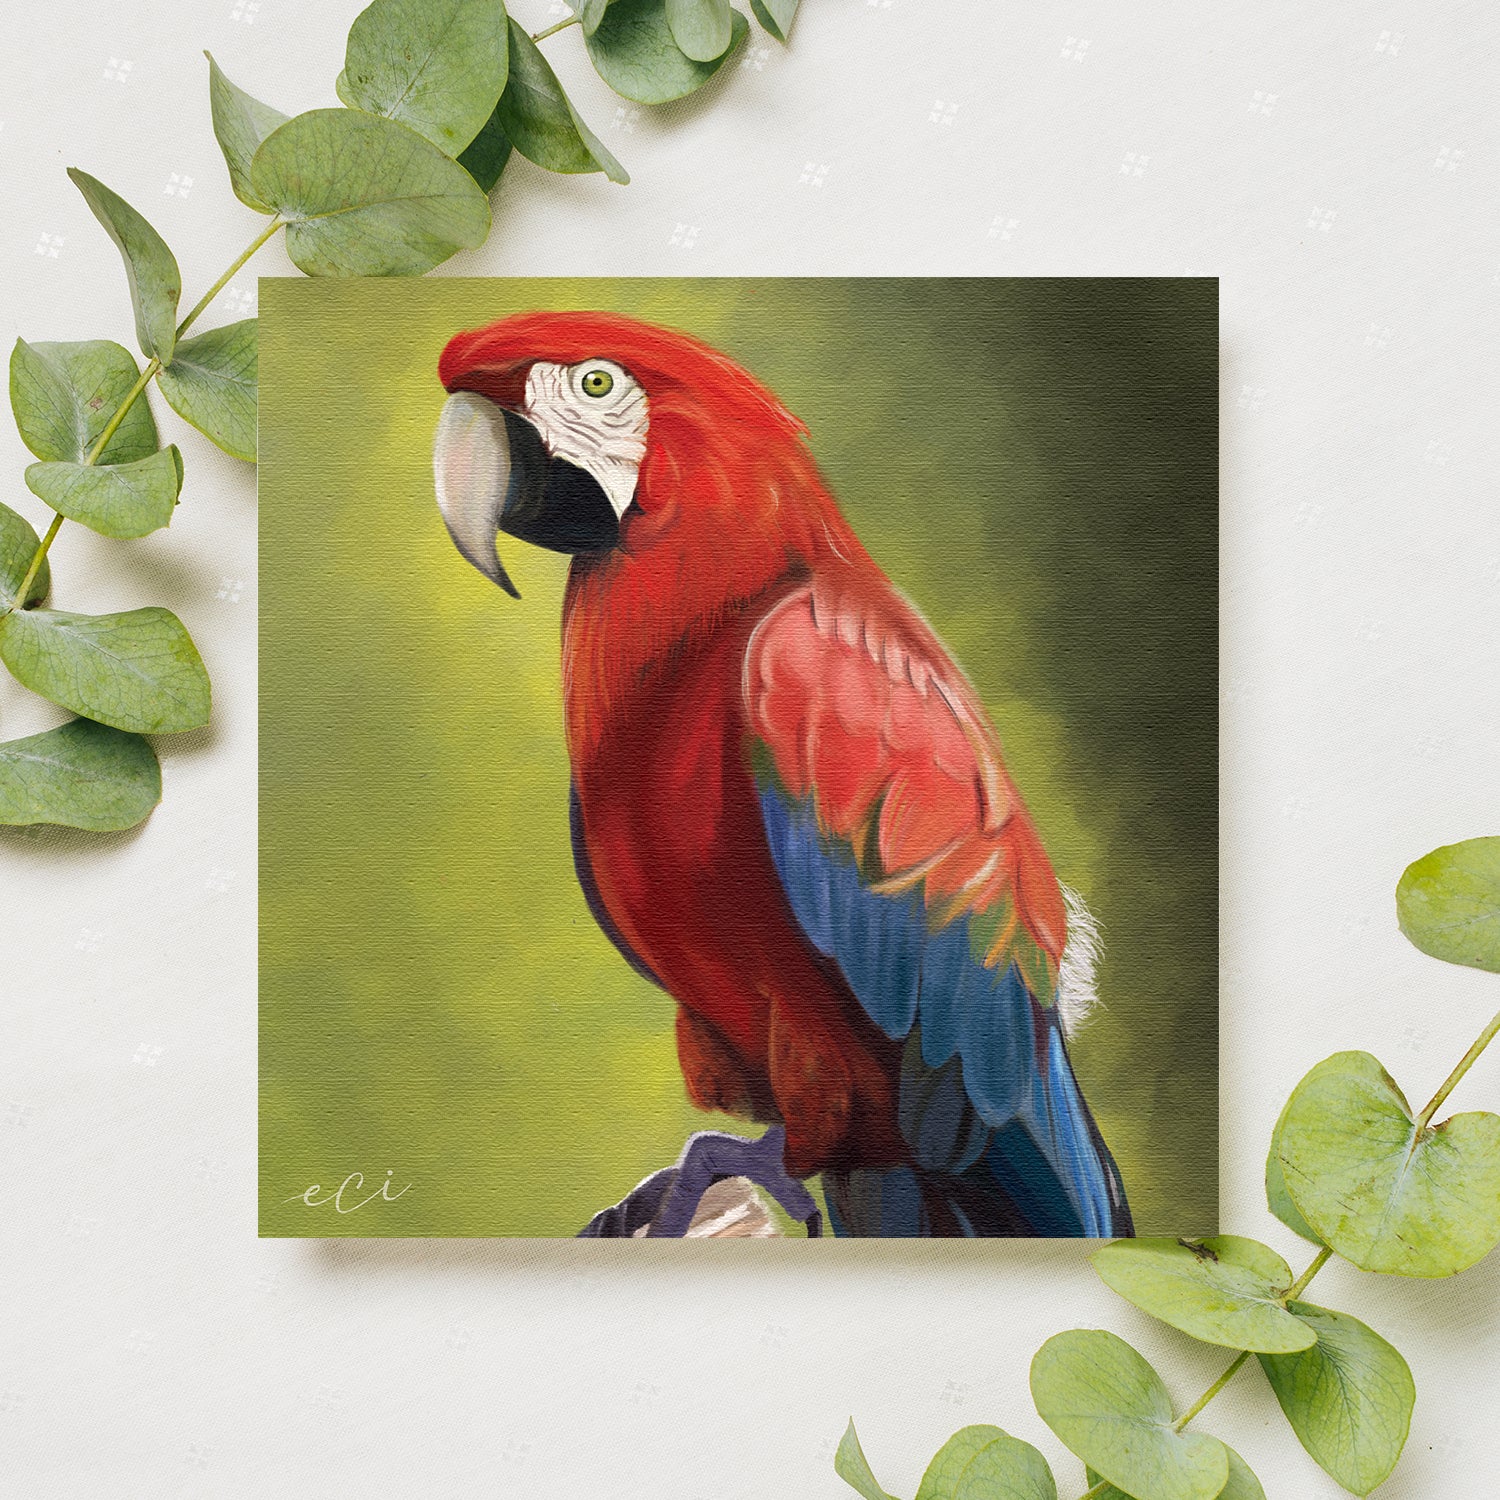 Colorful Parrot on Tree Original Design Canvas Printed Wall Painting 2